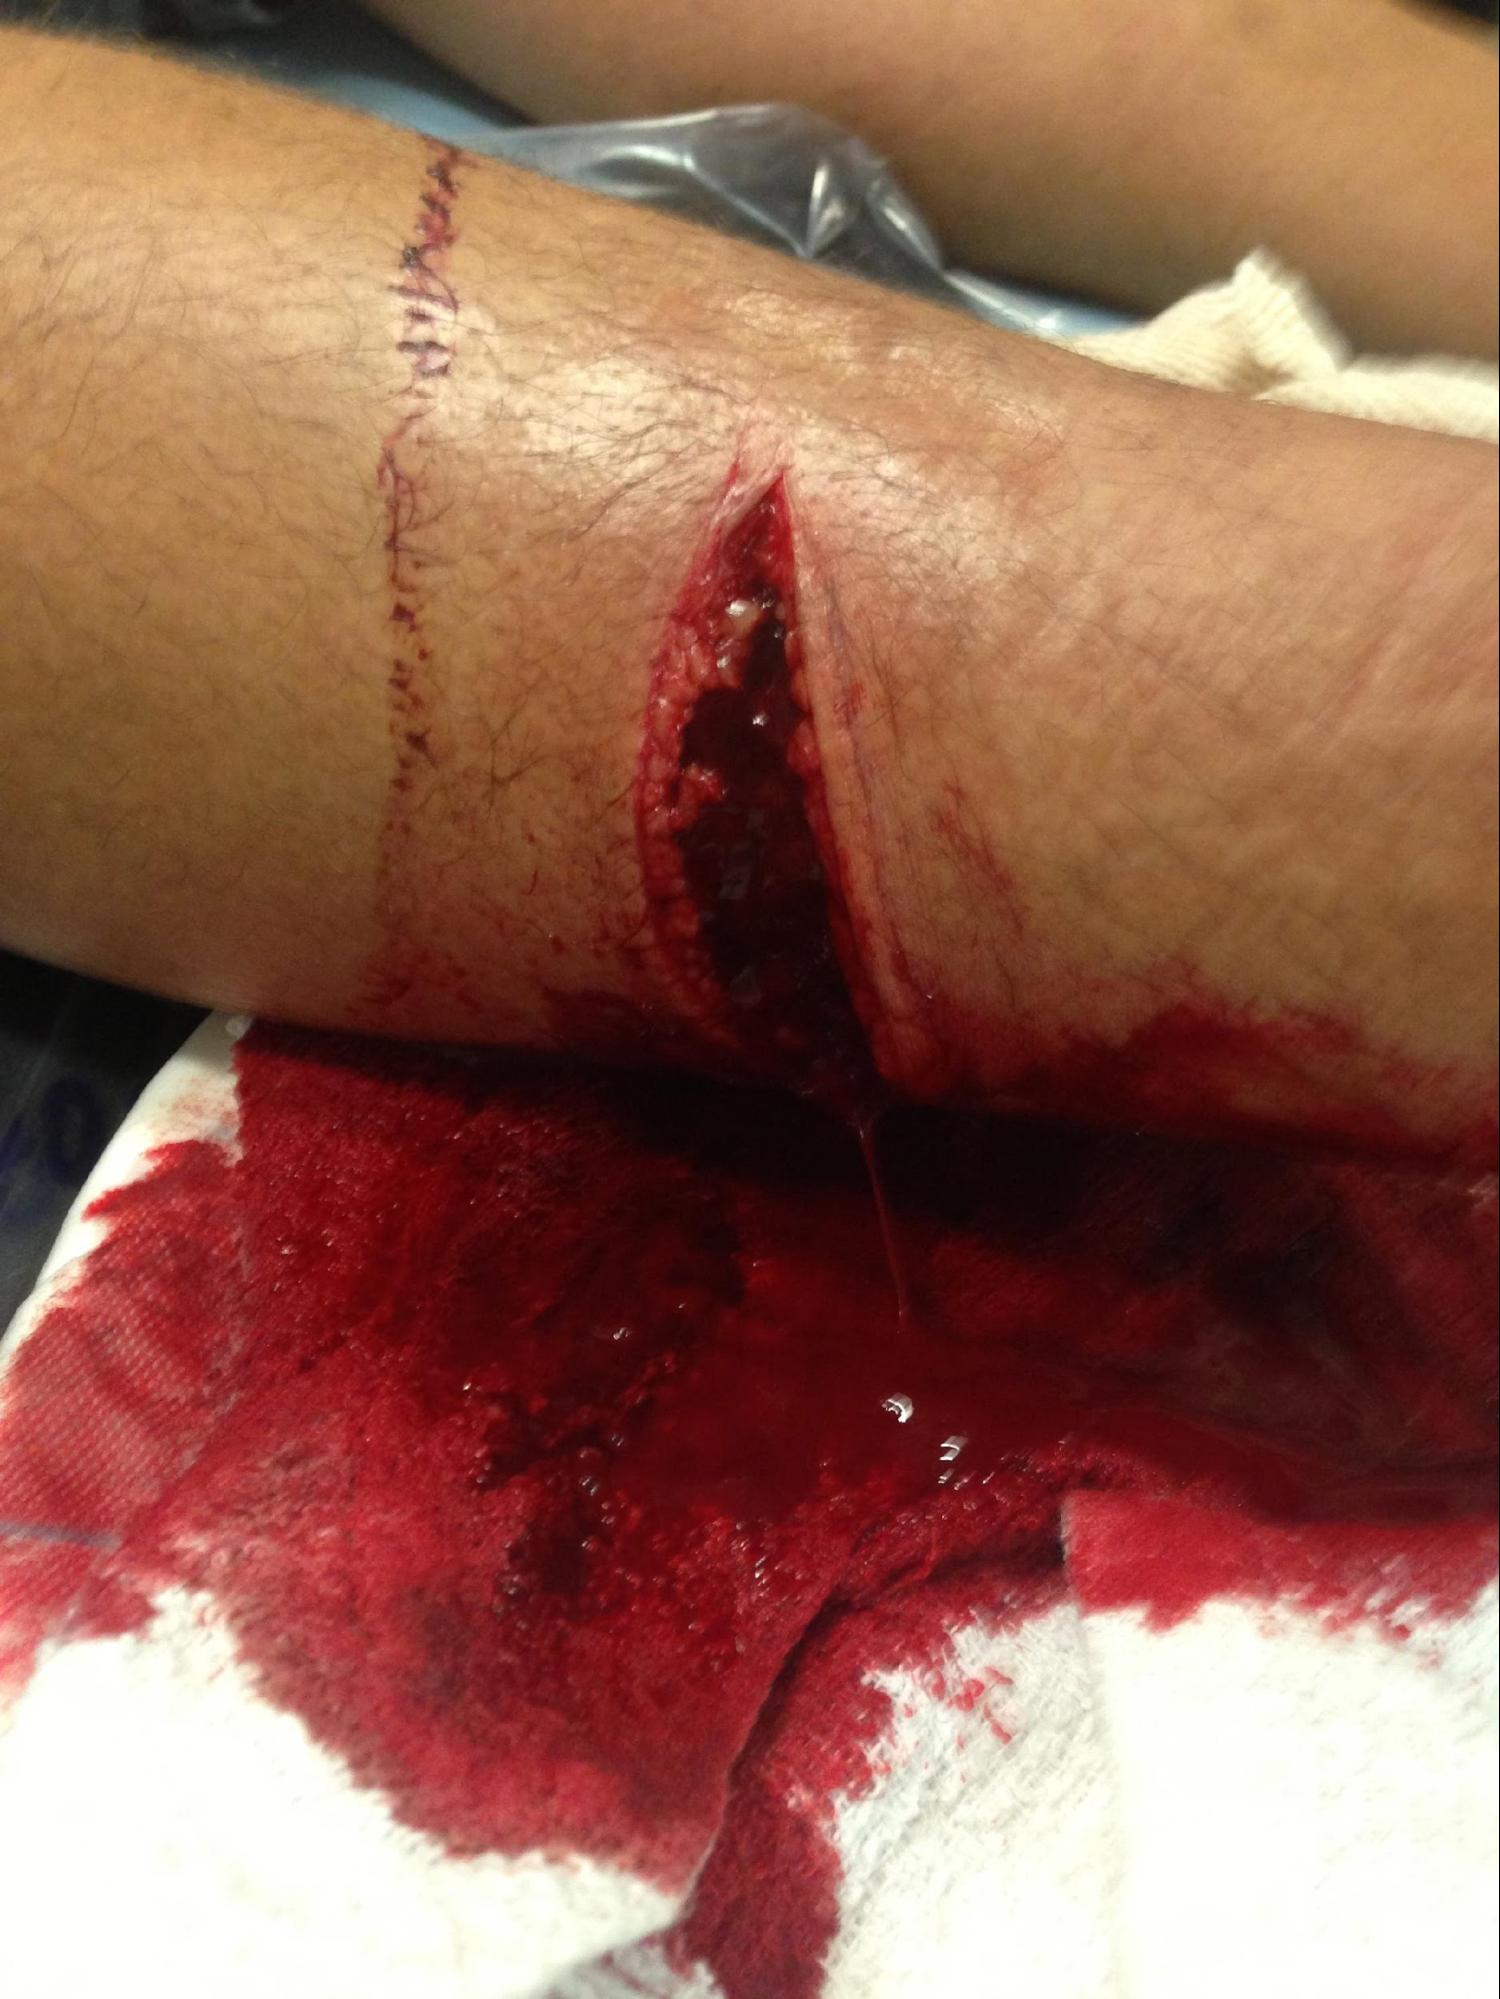 <p>Laceration of the Right Lower Leg. Full-thickness laceration of the right lower leg.</p>